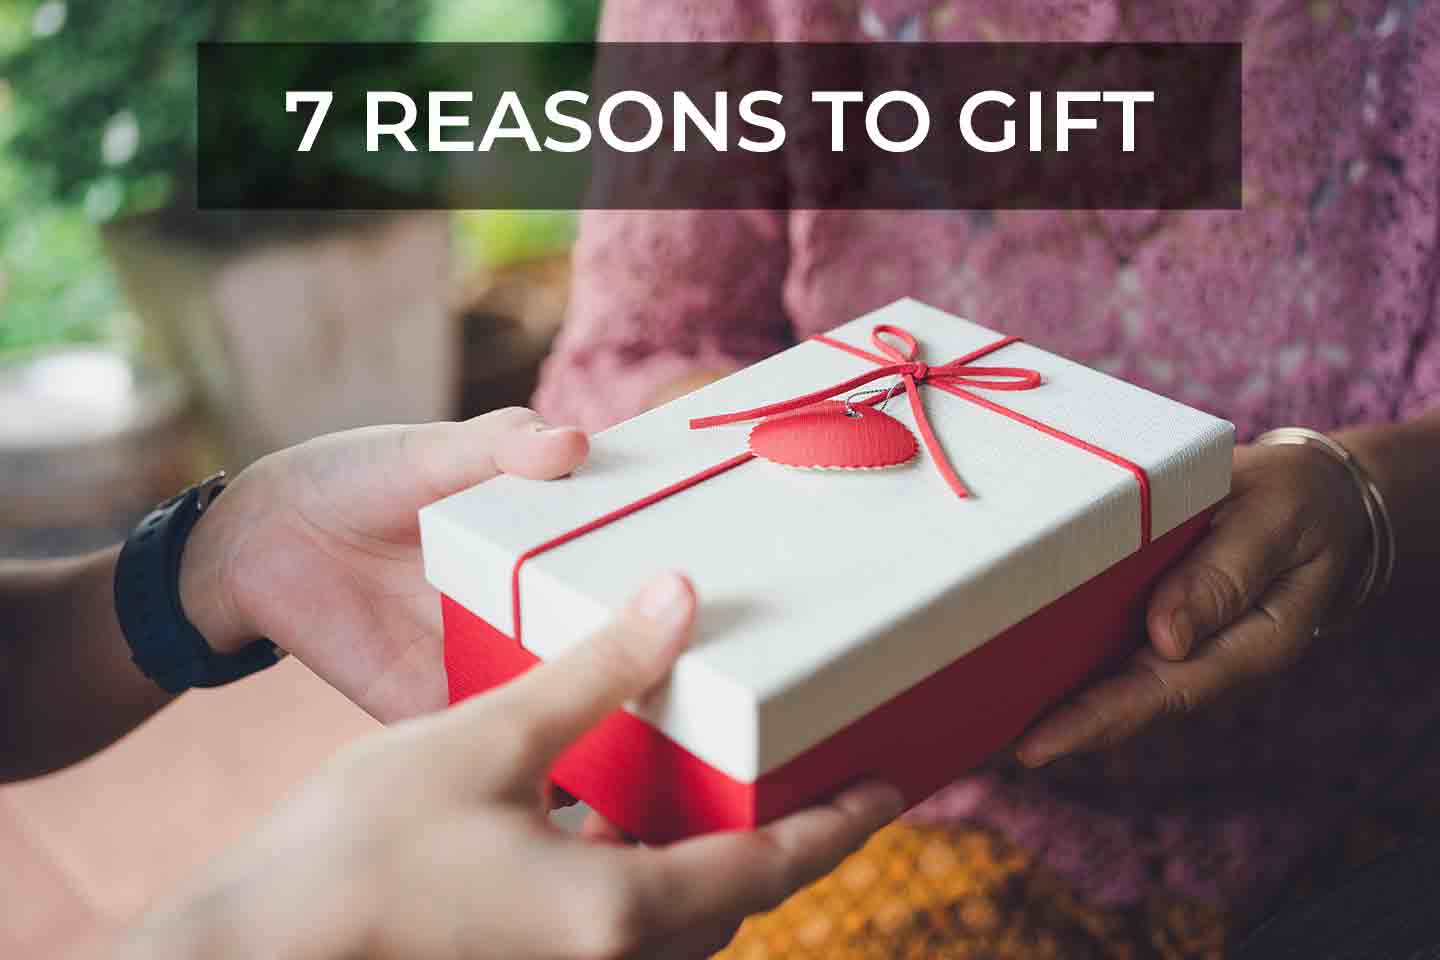 7 REASONS TO GIFT